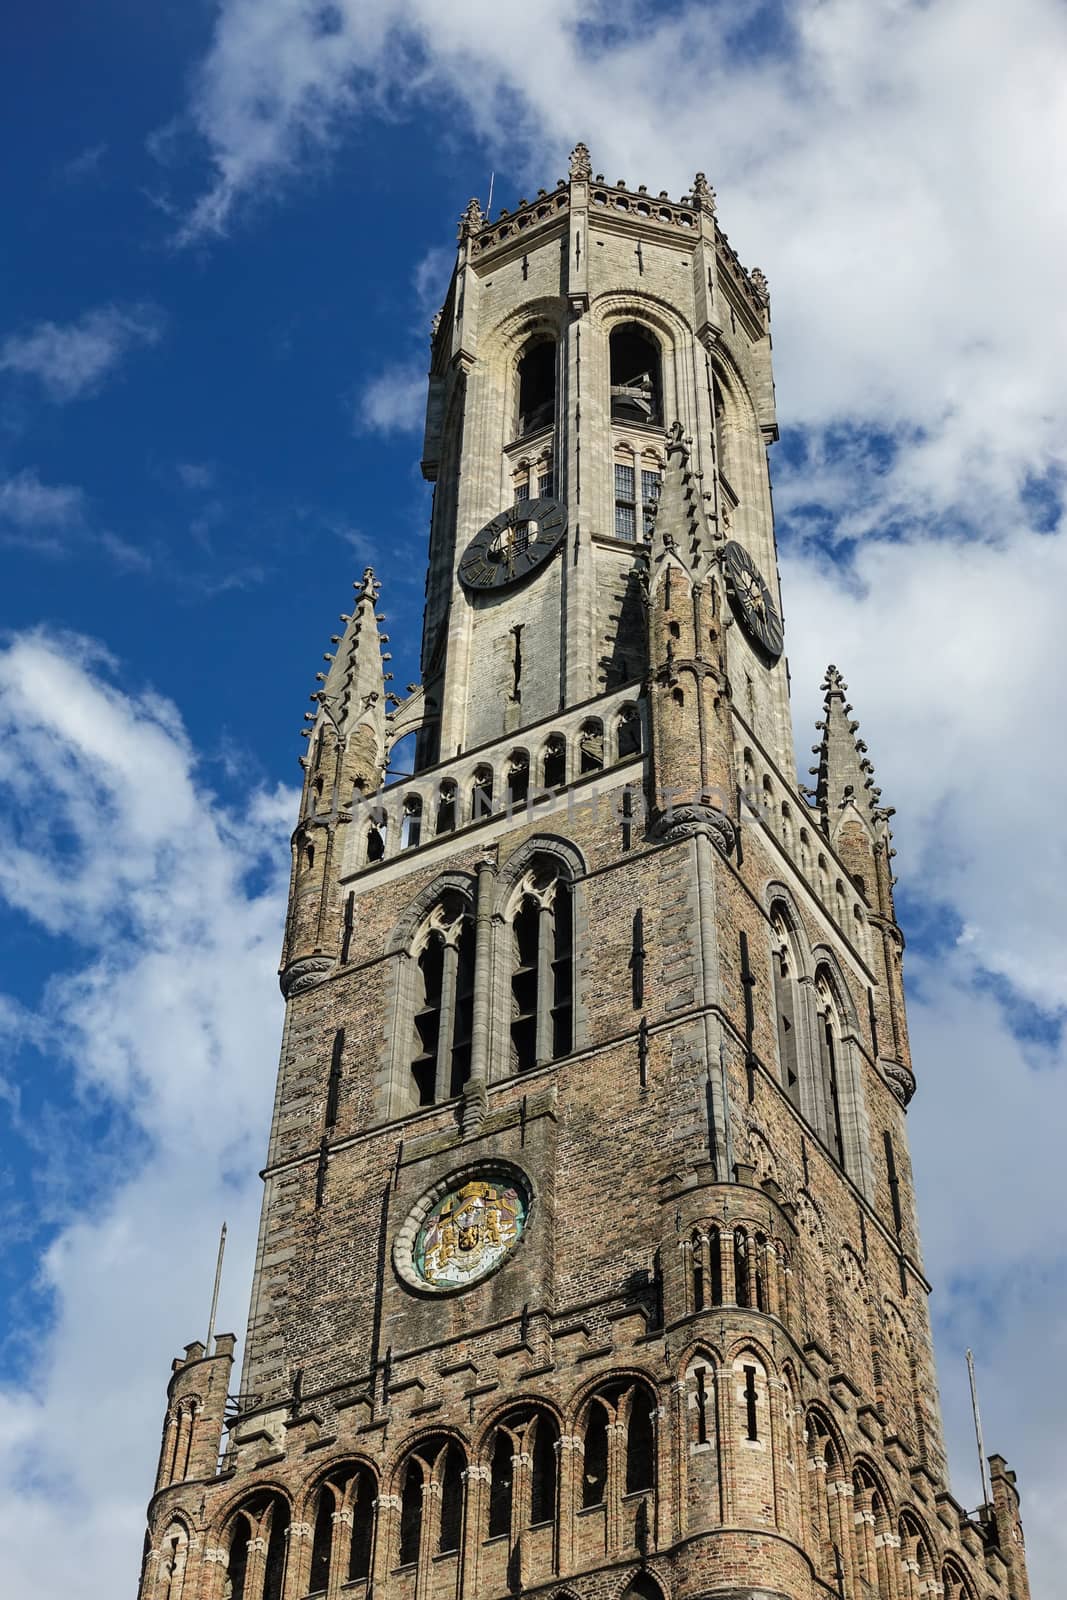 Bruges, Flanders, Belgium -  June 16, 2019: Brown-gray Brick stone Top of the tower of the Belfry against blue sky with white clouds.